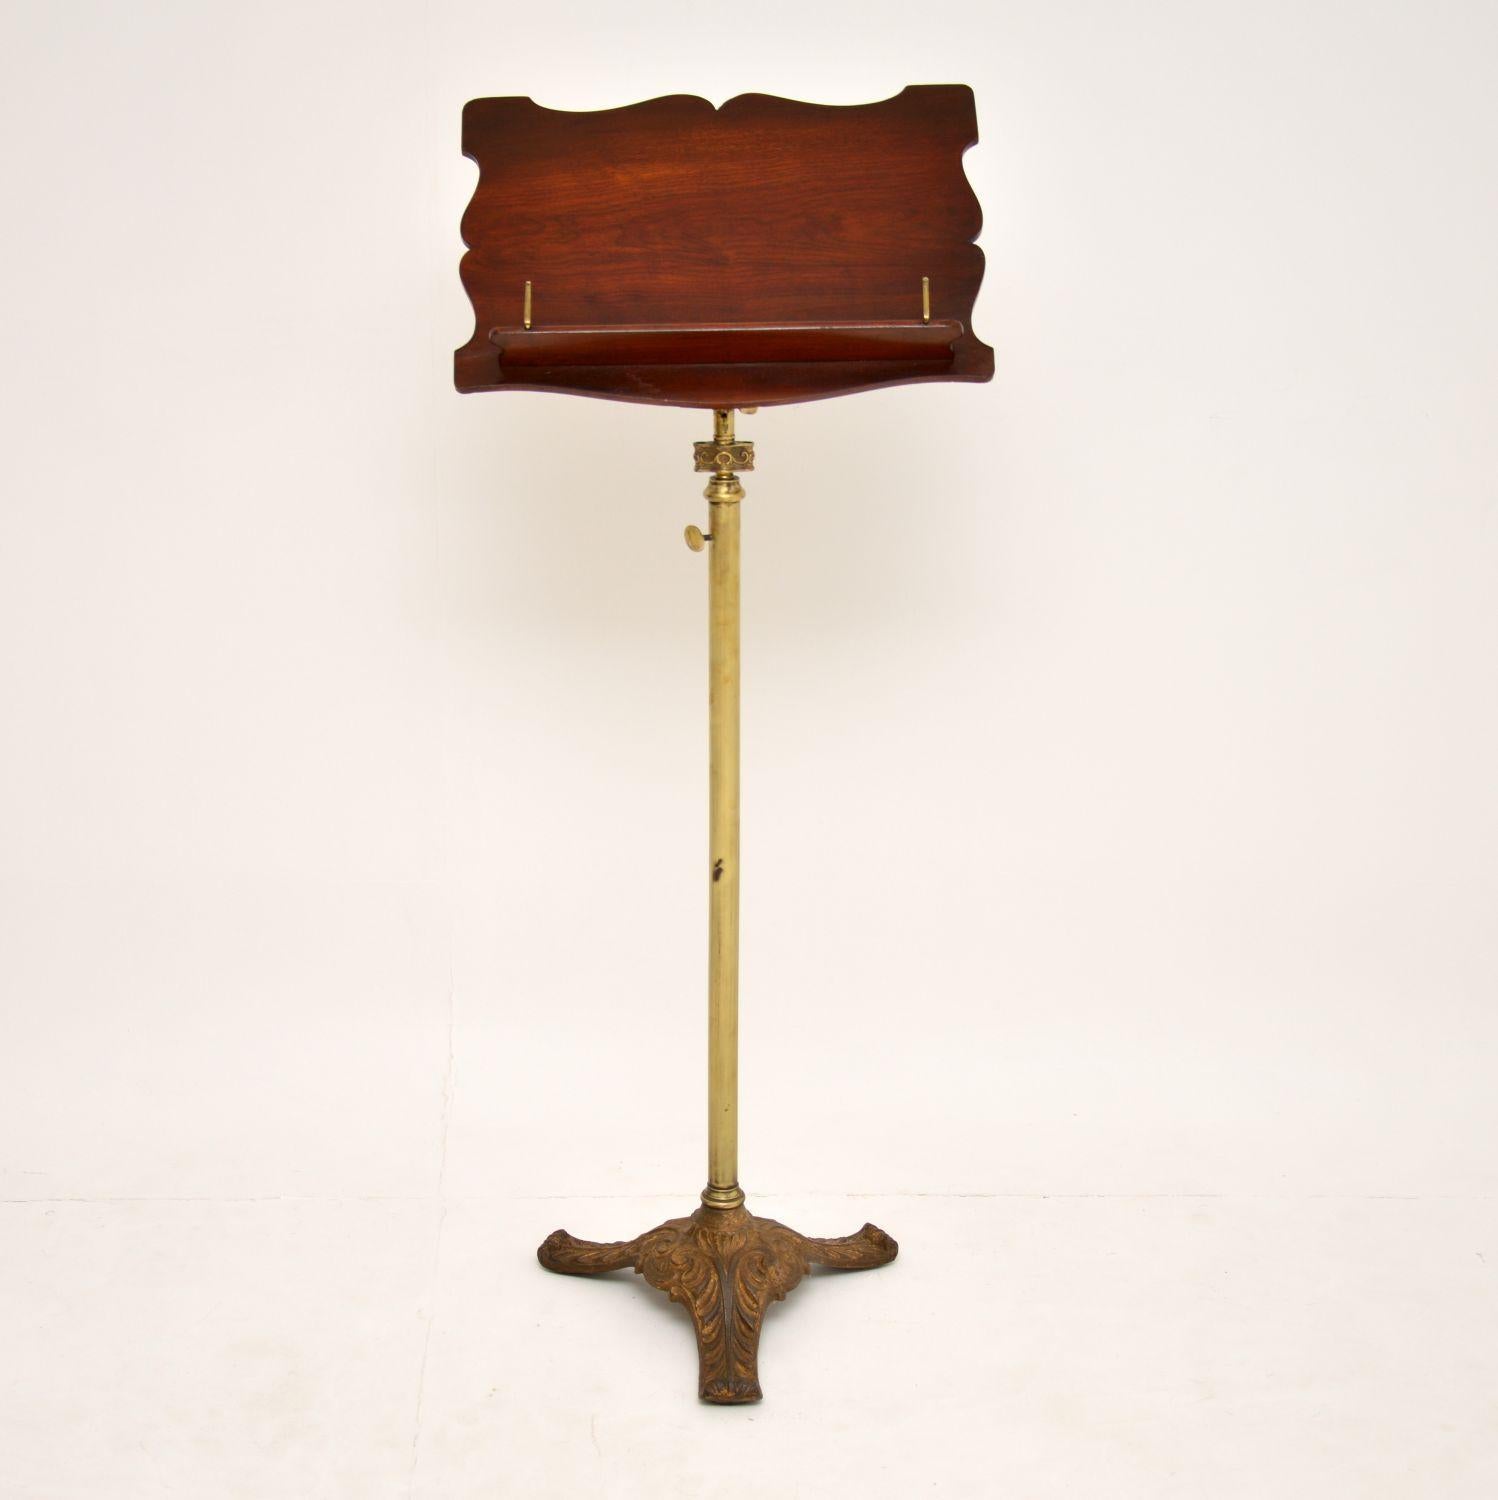 Antique Victorian mahogany and brass reading or music stand, in good condition and dating to circa 1860s period.

The top section is mahogany and is adjustable. The upright brass stand also has a height adjustment system. The heavy base section is